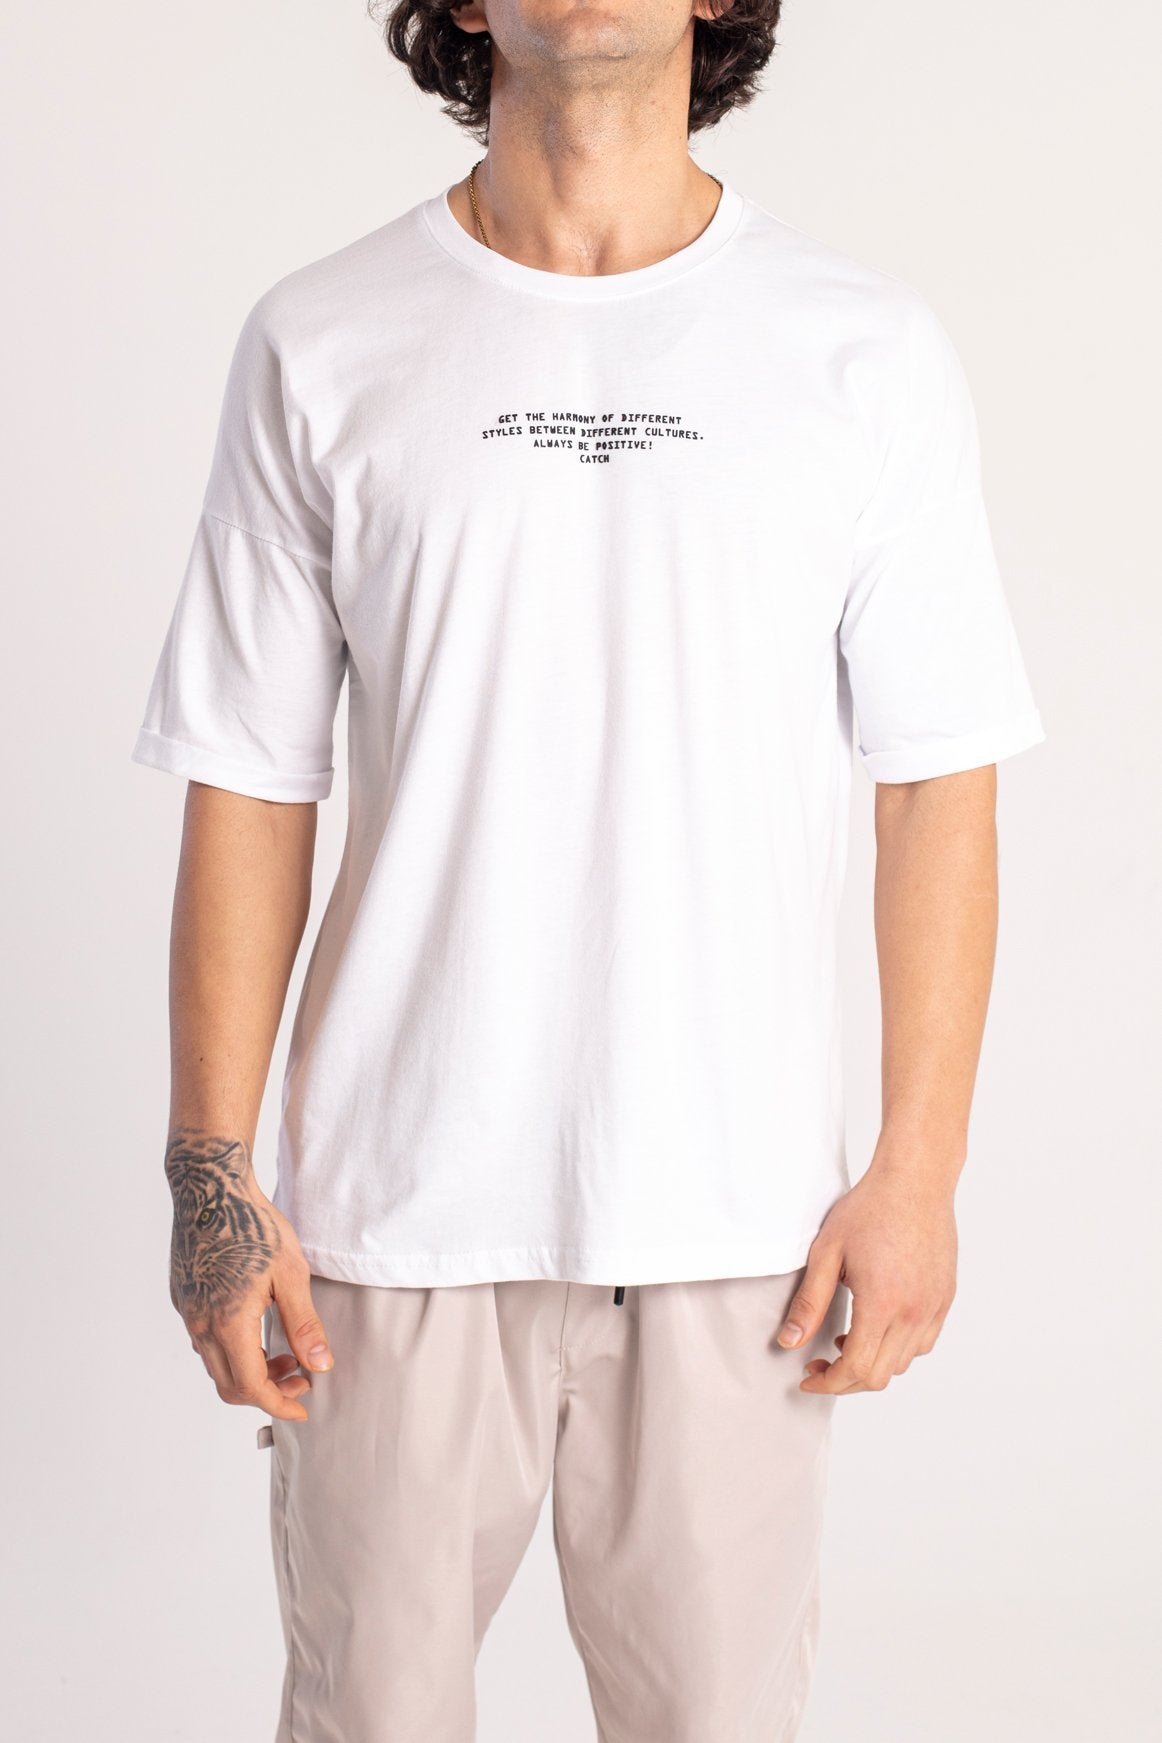 T-SHIRT OVERSIZE - GET THE HARMONY - COLORE BIANCO